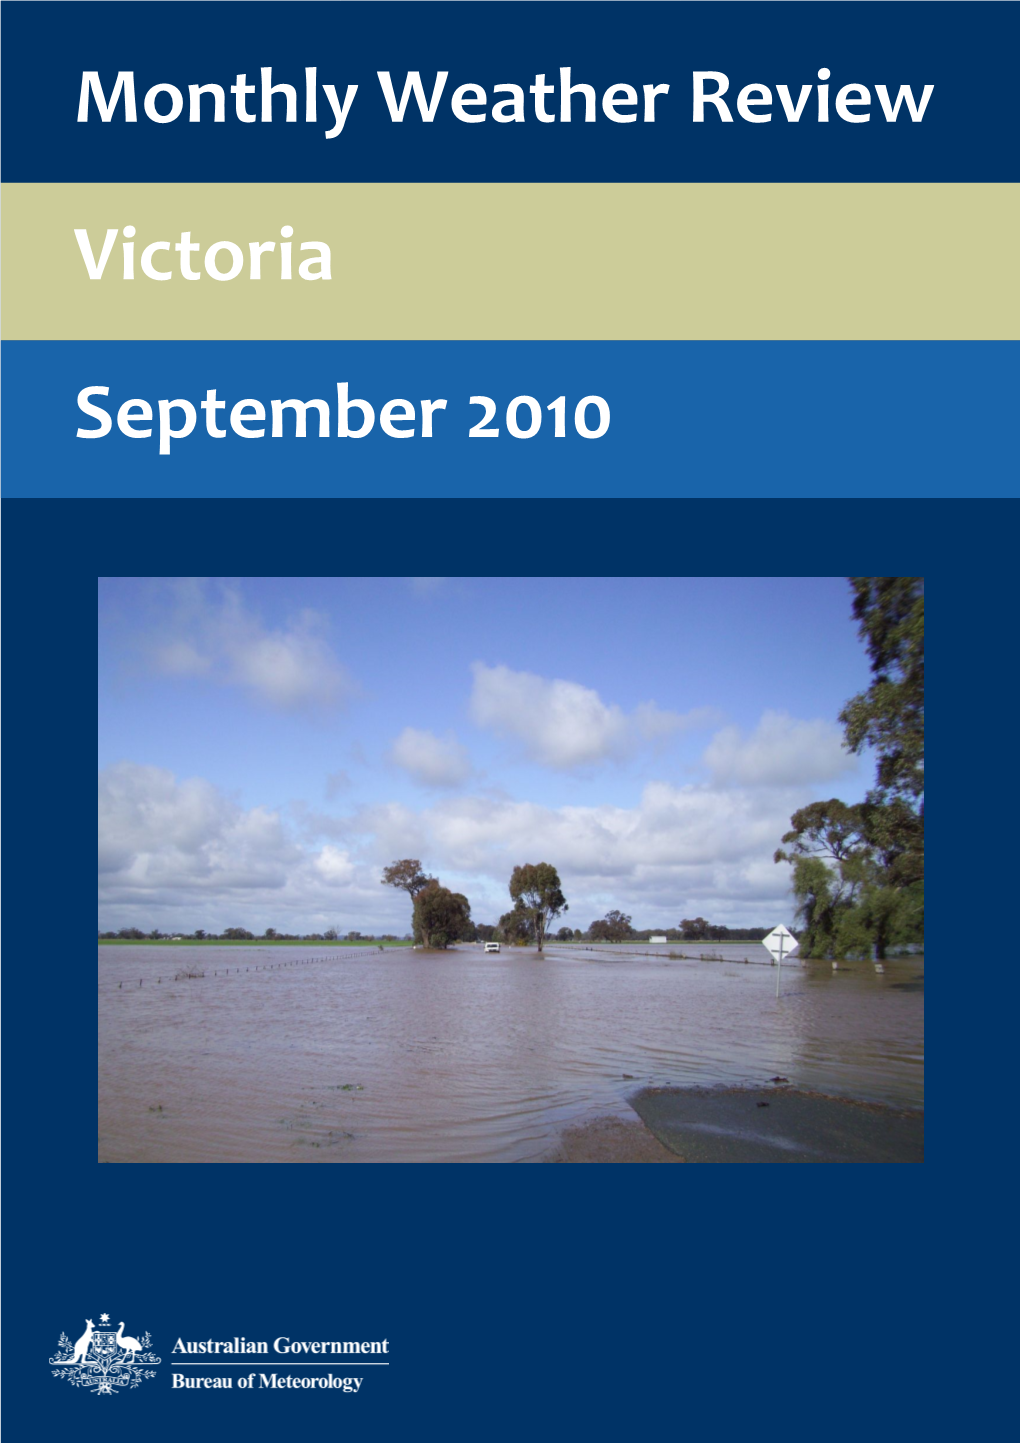 Monthly Weather Review Victoria September 2010